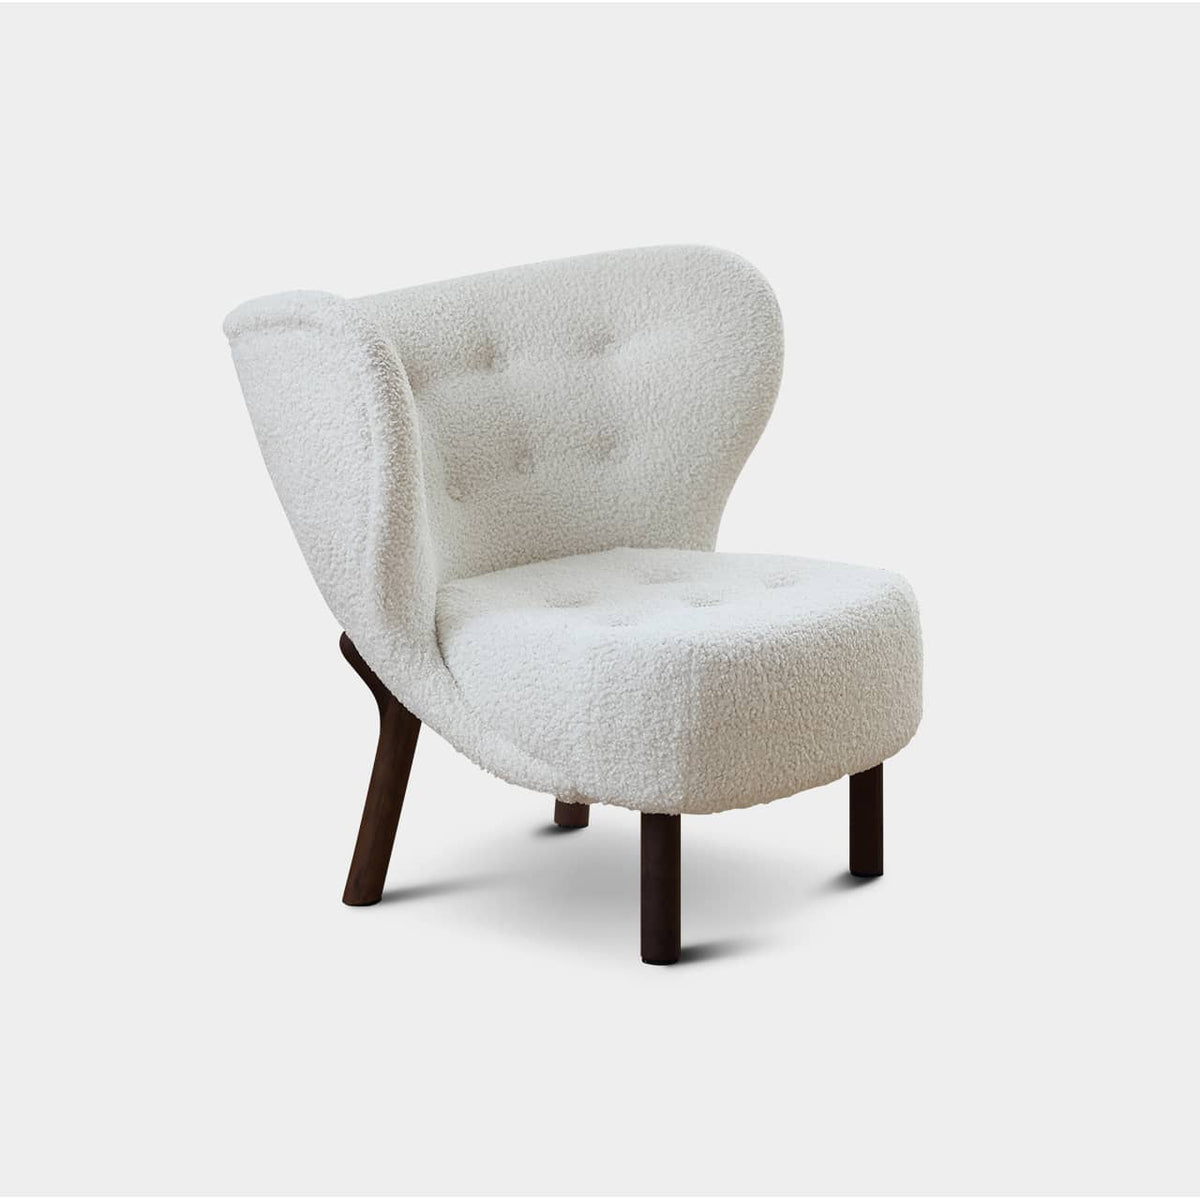 Luxurious White Walnut Wood Chair with Soft Faux Lambswool Upholstery my-361